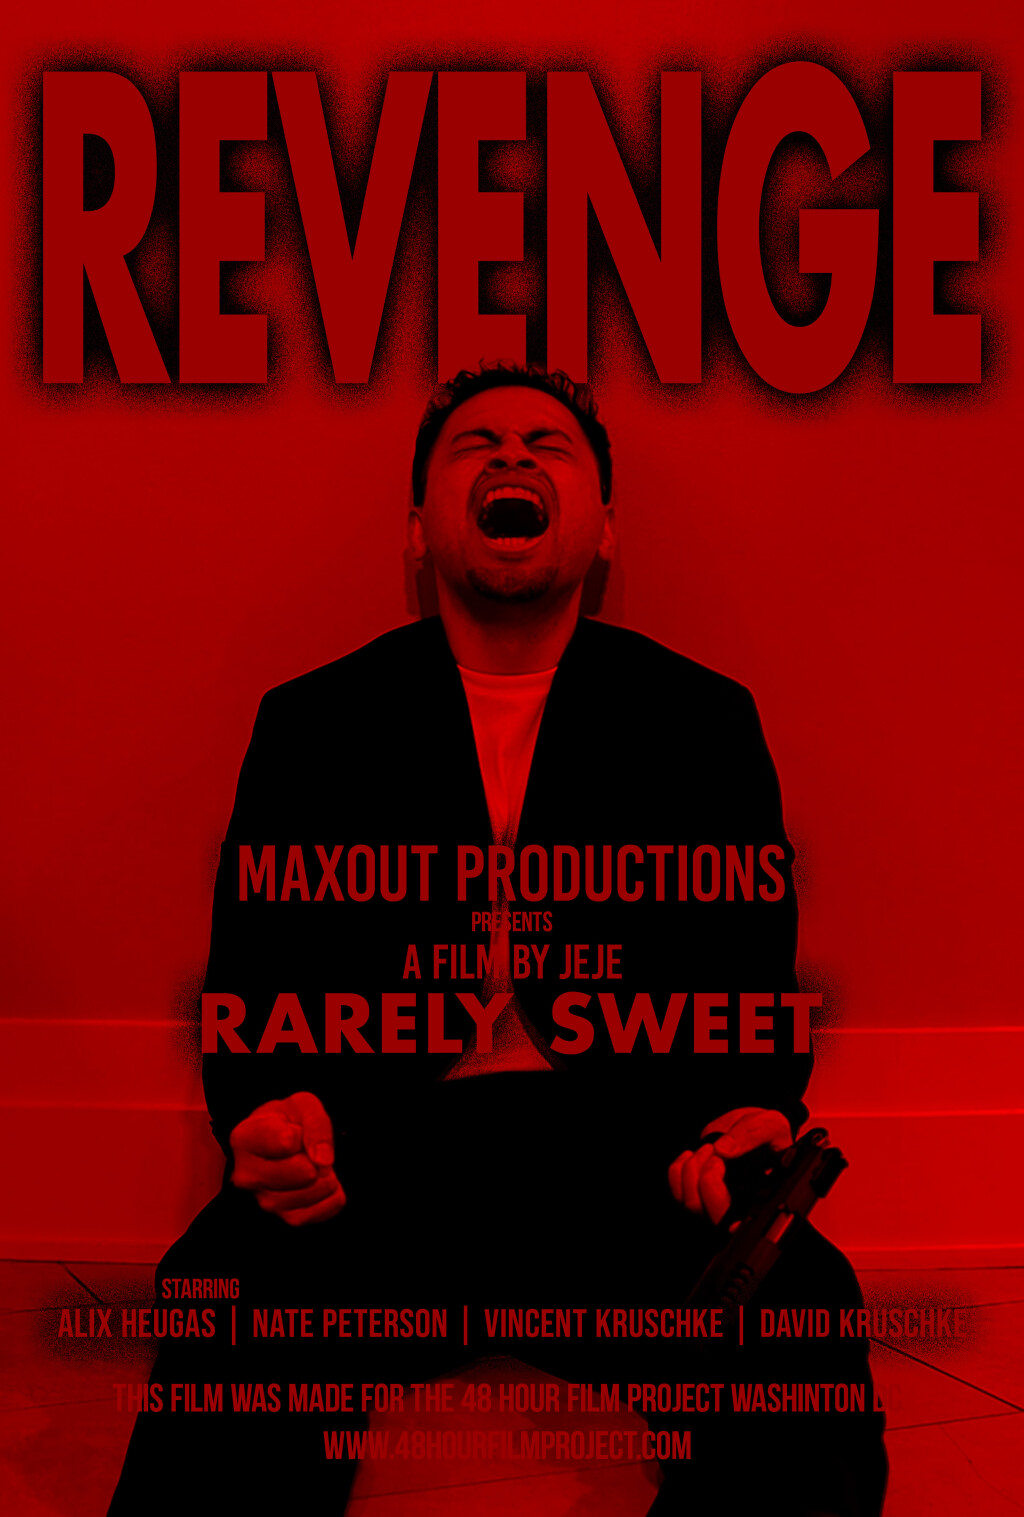 Filmposter for Rarely Sweet